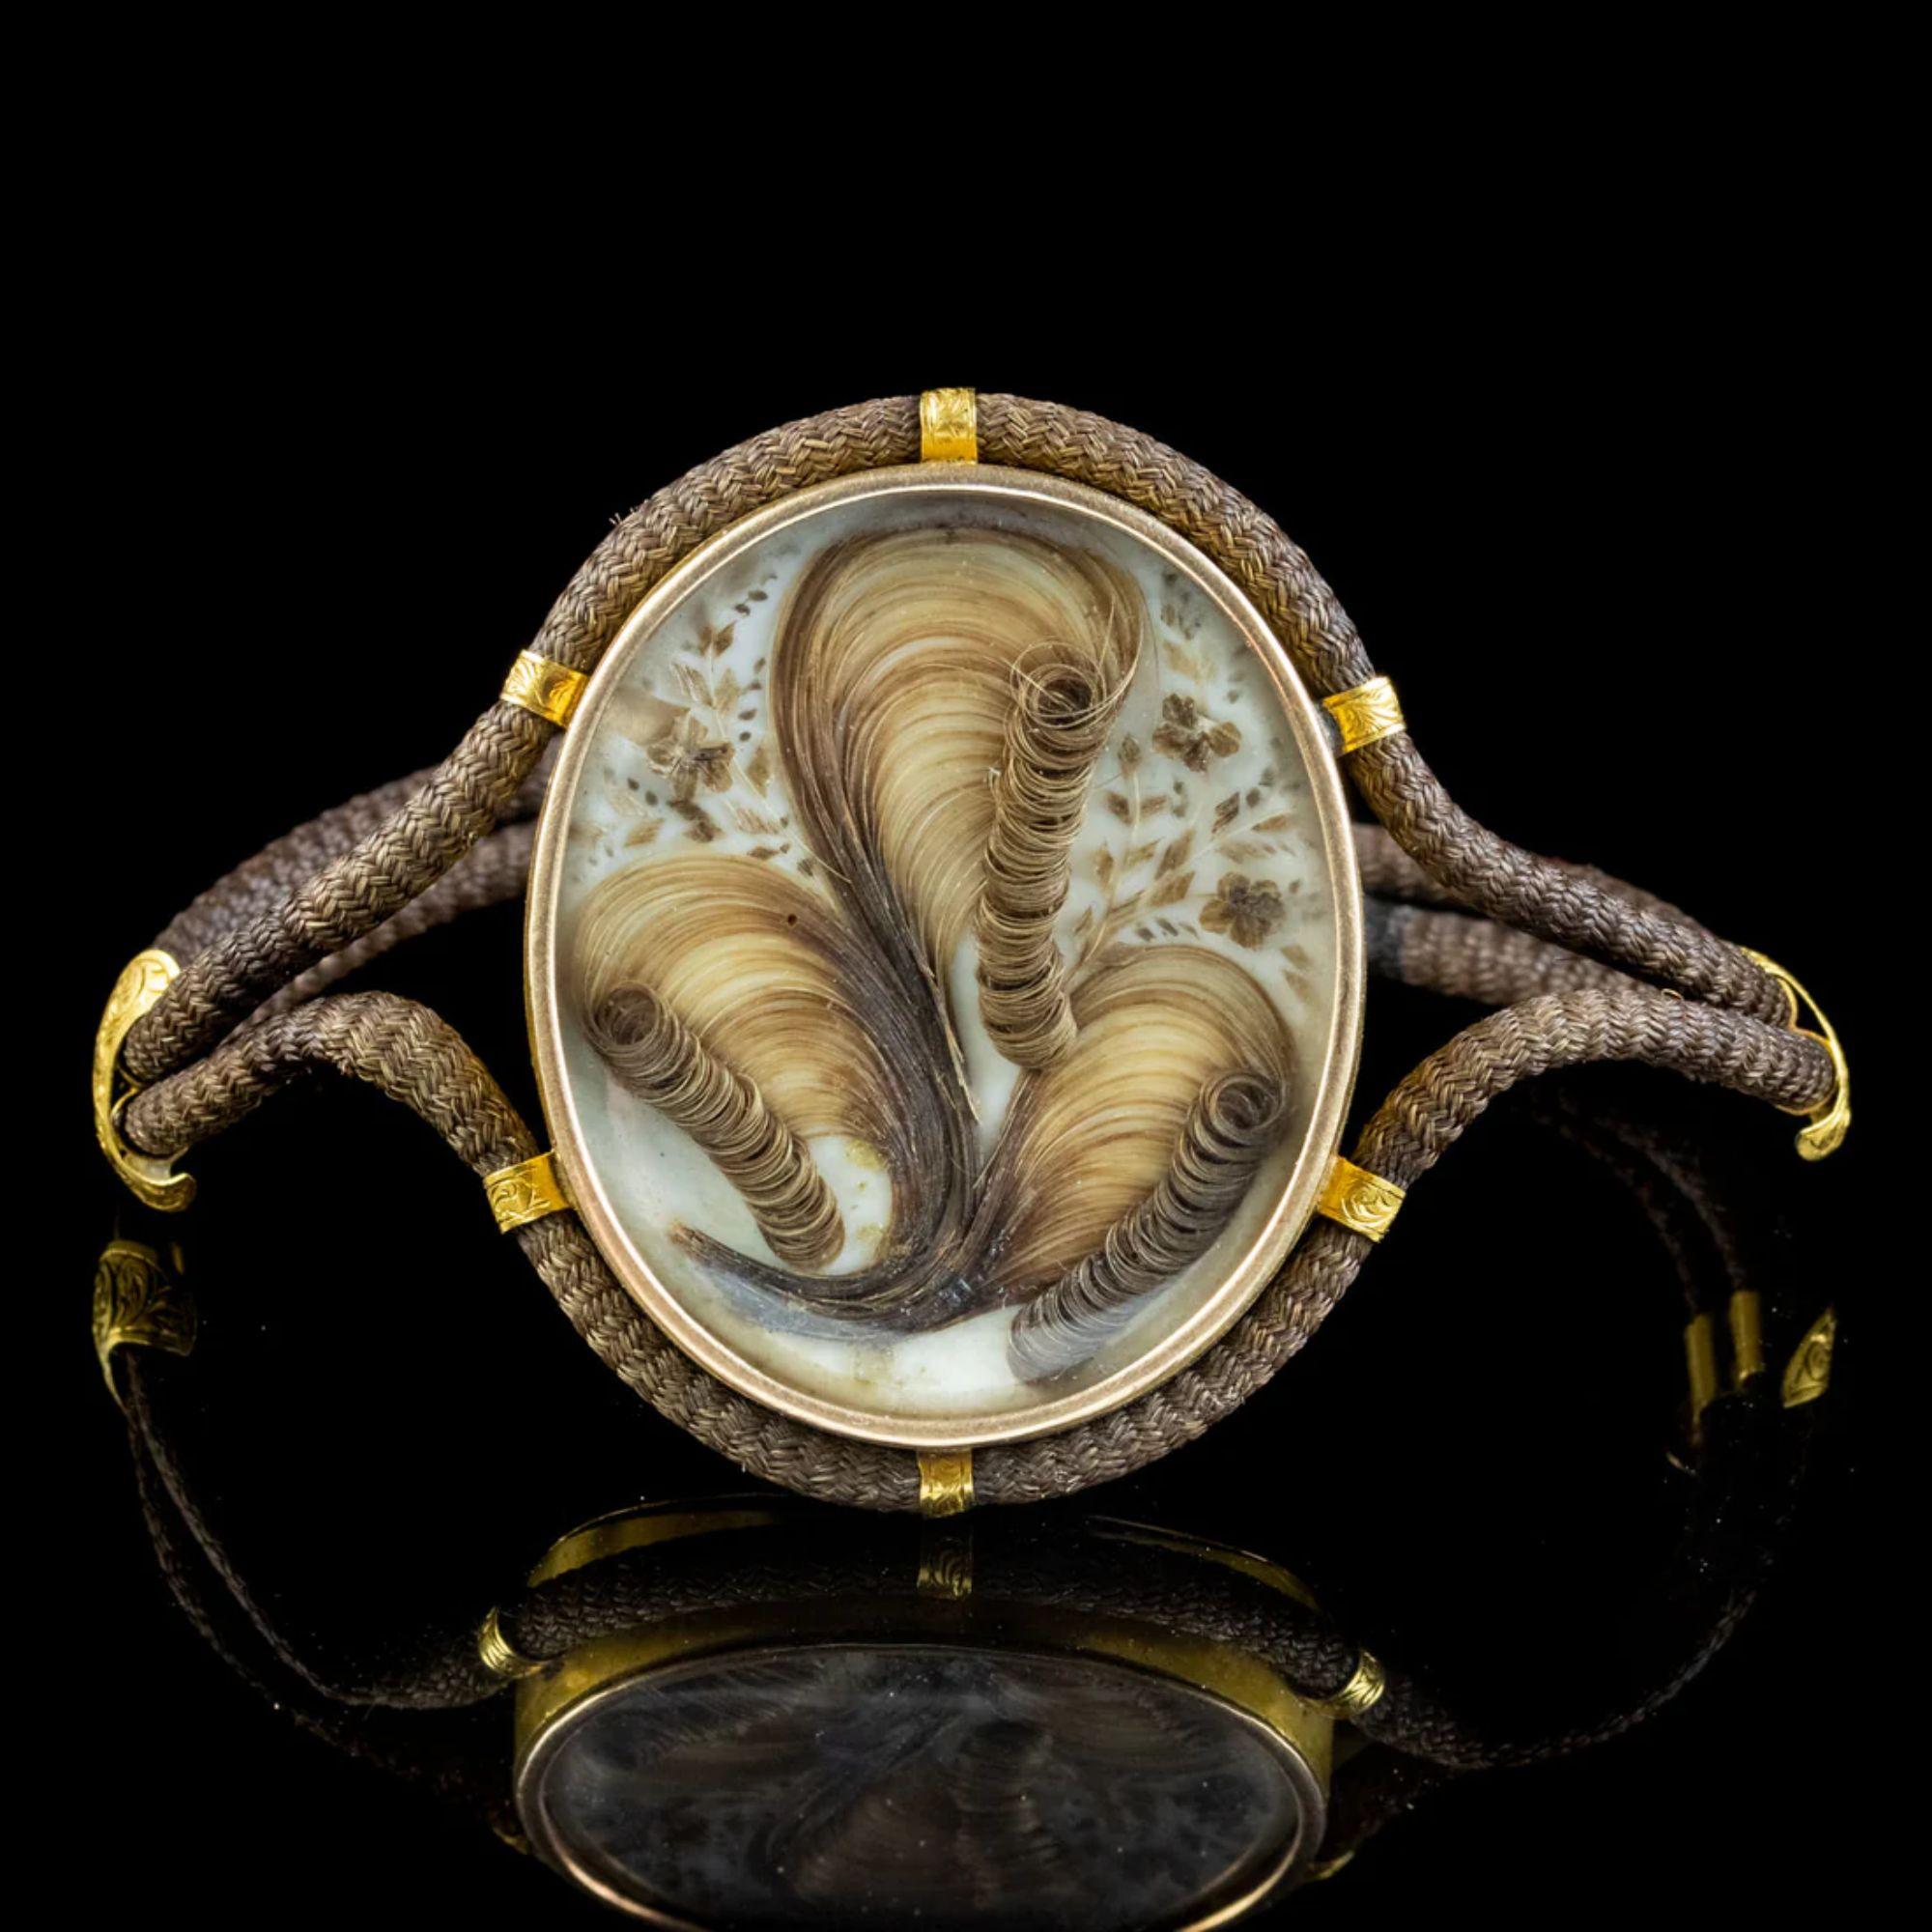 A fascinating Antique Georgian Mourning bracelet from the early 19th Century featuring a large 18ct Gold double-sided locket with a magnificent display of curled hair and forget me nots beautifully preserved behind a glass window. 

Mourning